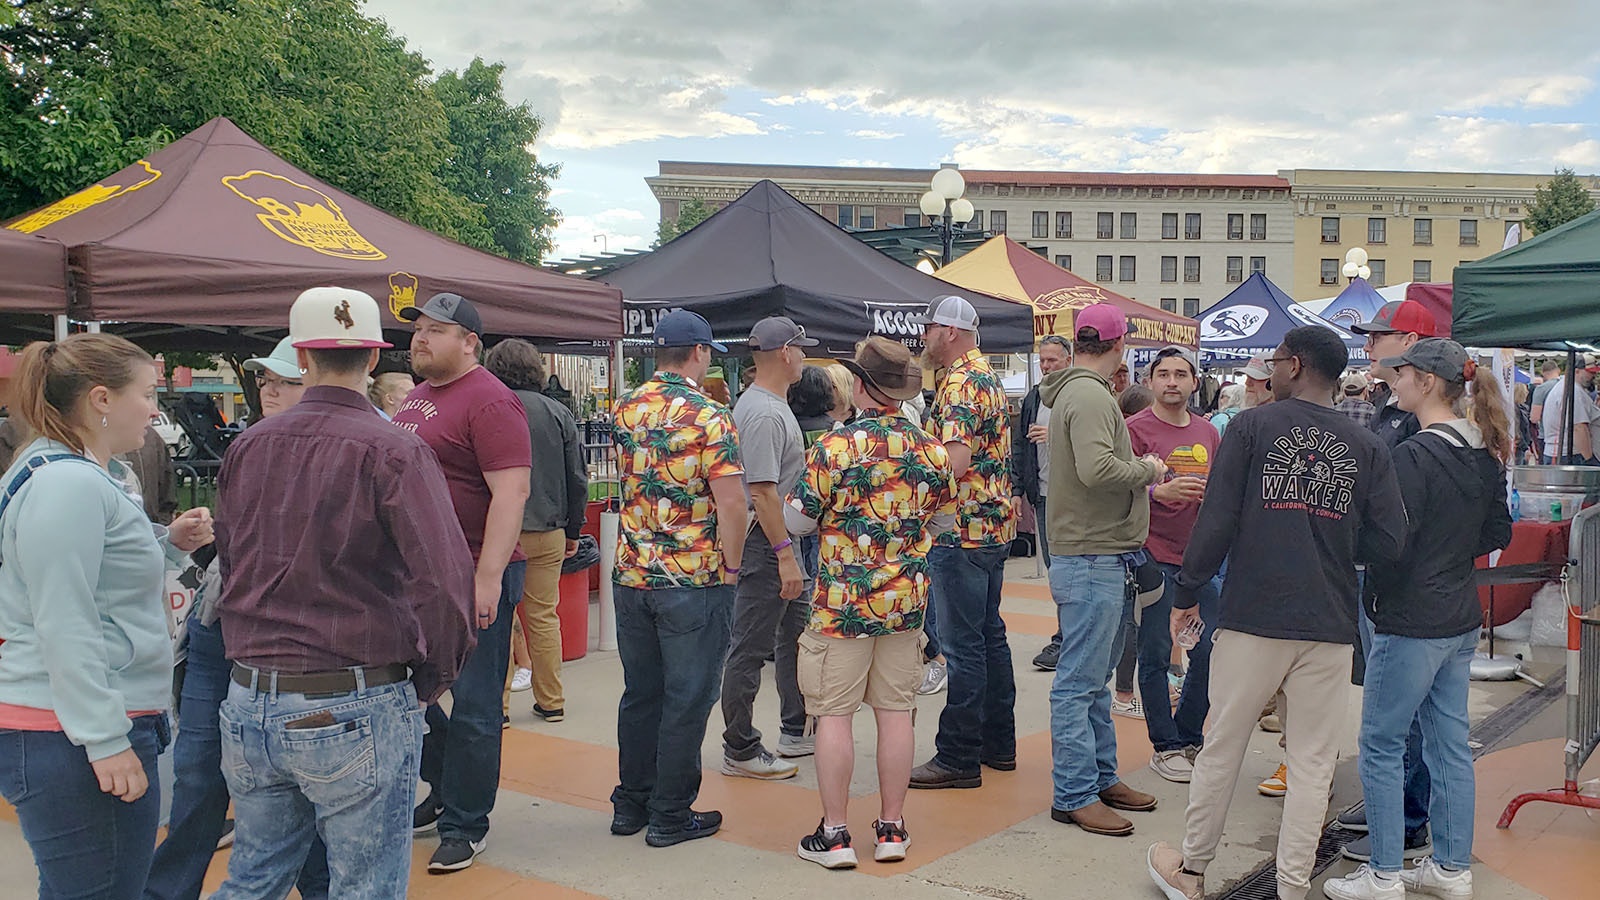 Wyoming's craft brew scene continues to grow, as shown by the huge crowd of people attracted to try dozens of beers — many produced in Wyoming — at a recent briefest in Cheyenne.